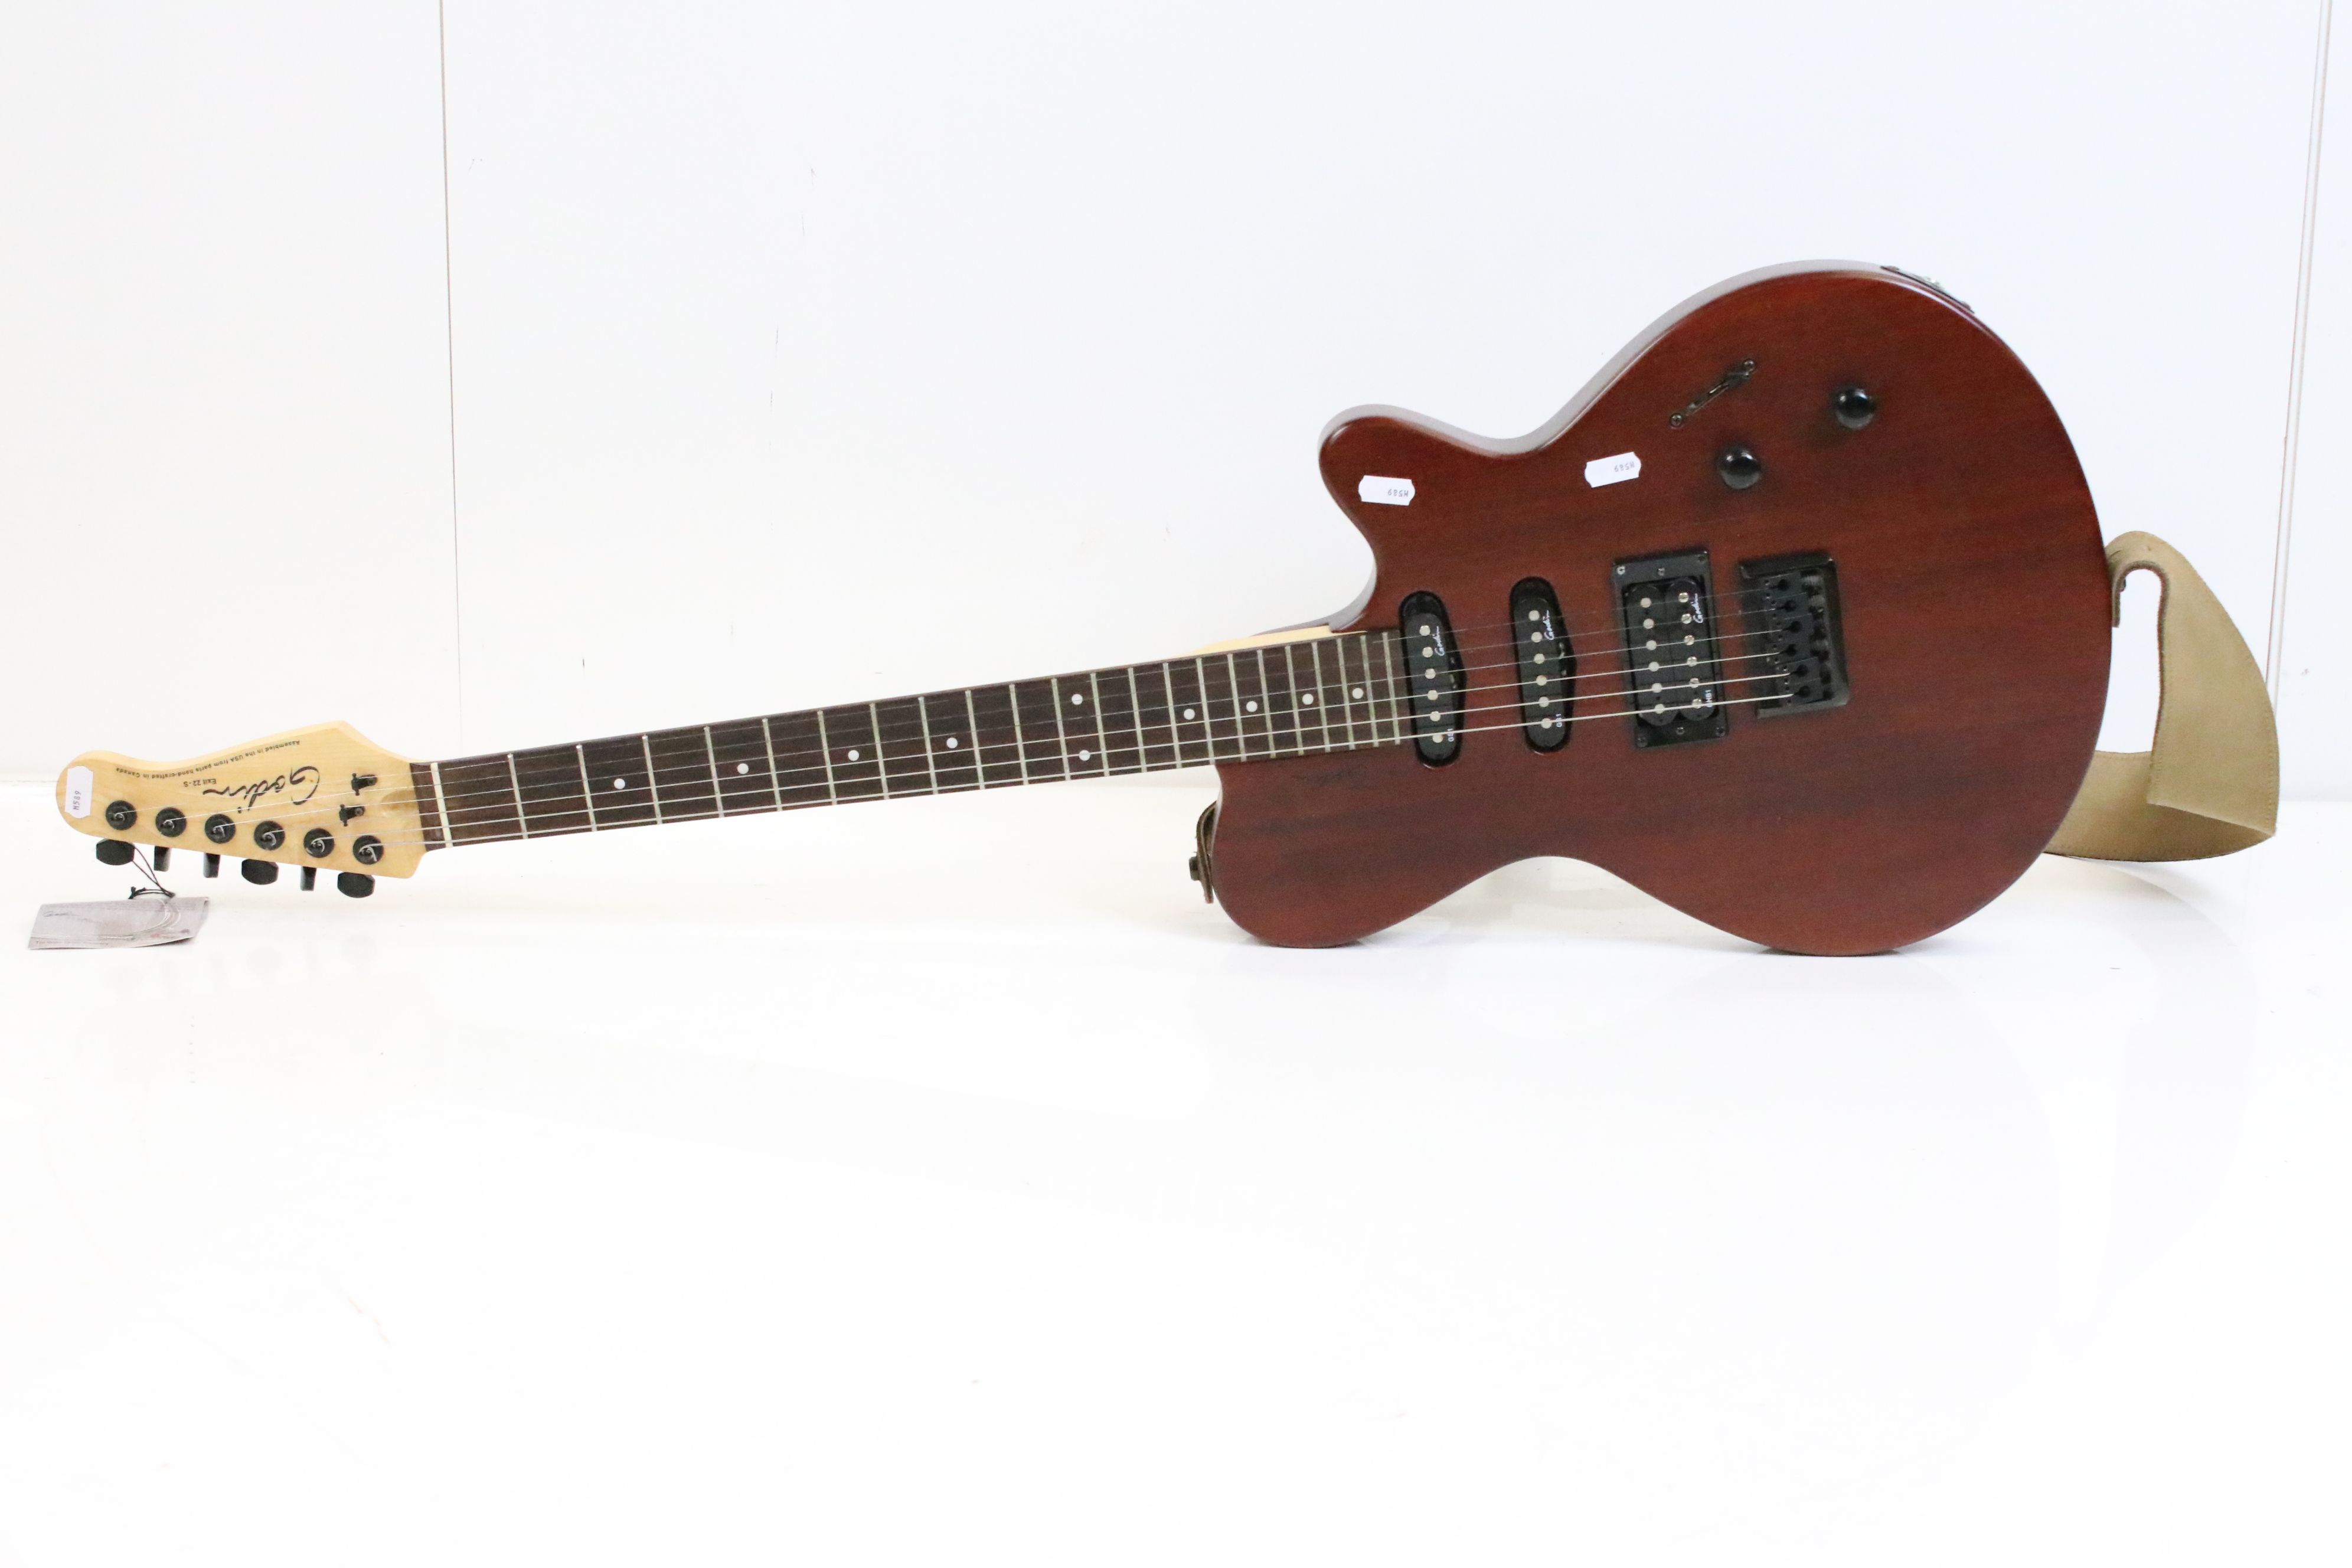 A USA made Godin Exit 22-S six string electric guitar.